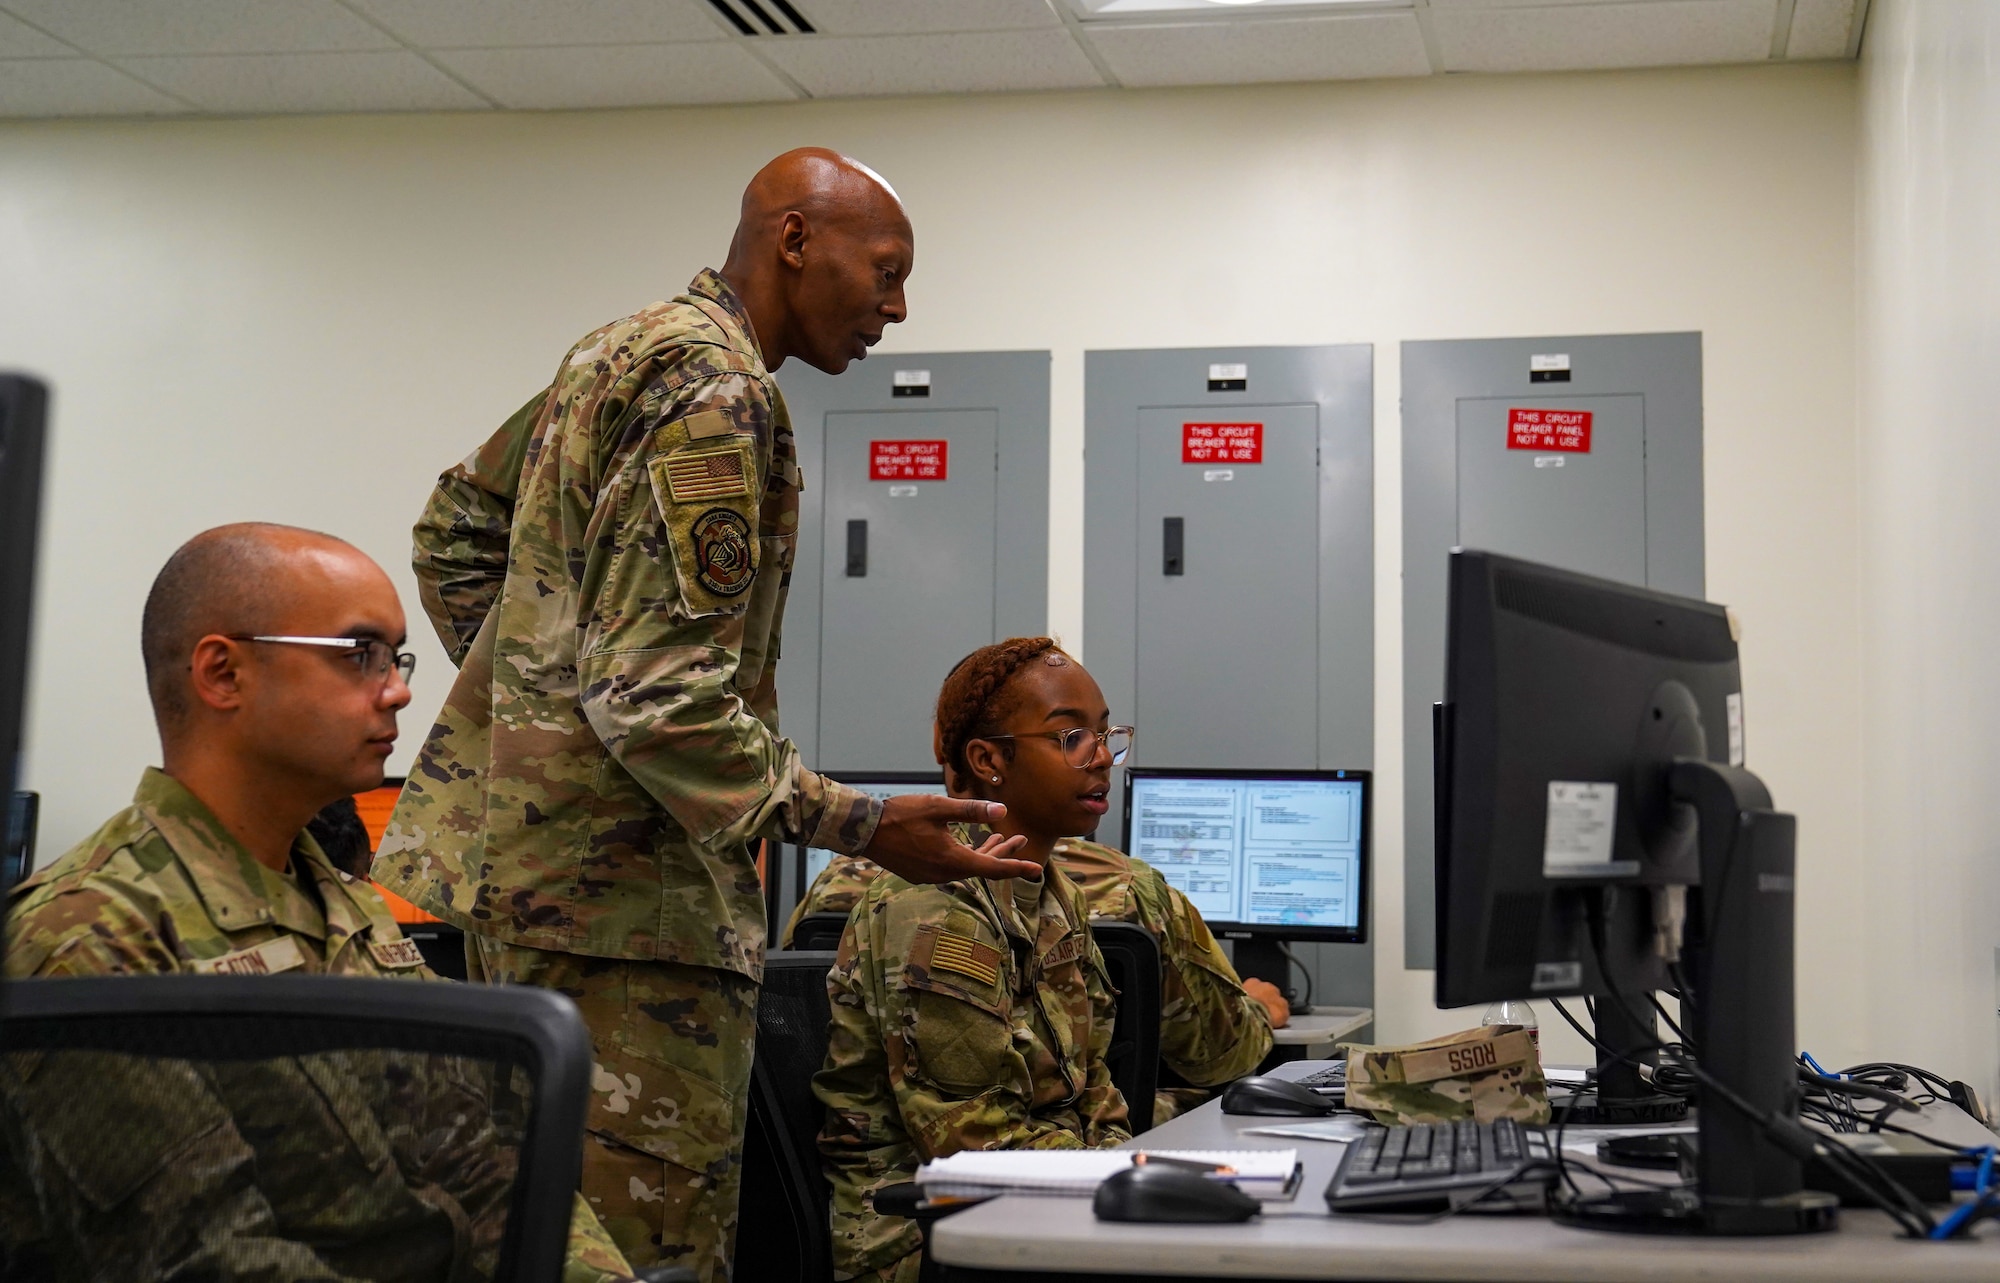 U.S. Air Force Tech. Sgt. Antoine Brown, 338th Training Squadron network systems operations course instructor, instructs Airman Orieal Ross, 338th TRS student, in Dolan Hall at Keesler Air Force Base, Mississippi, April 24, 2023.